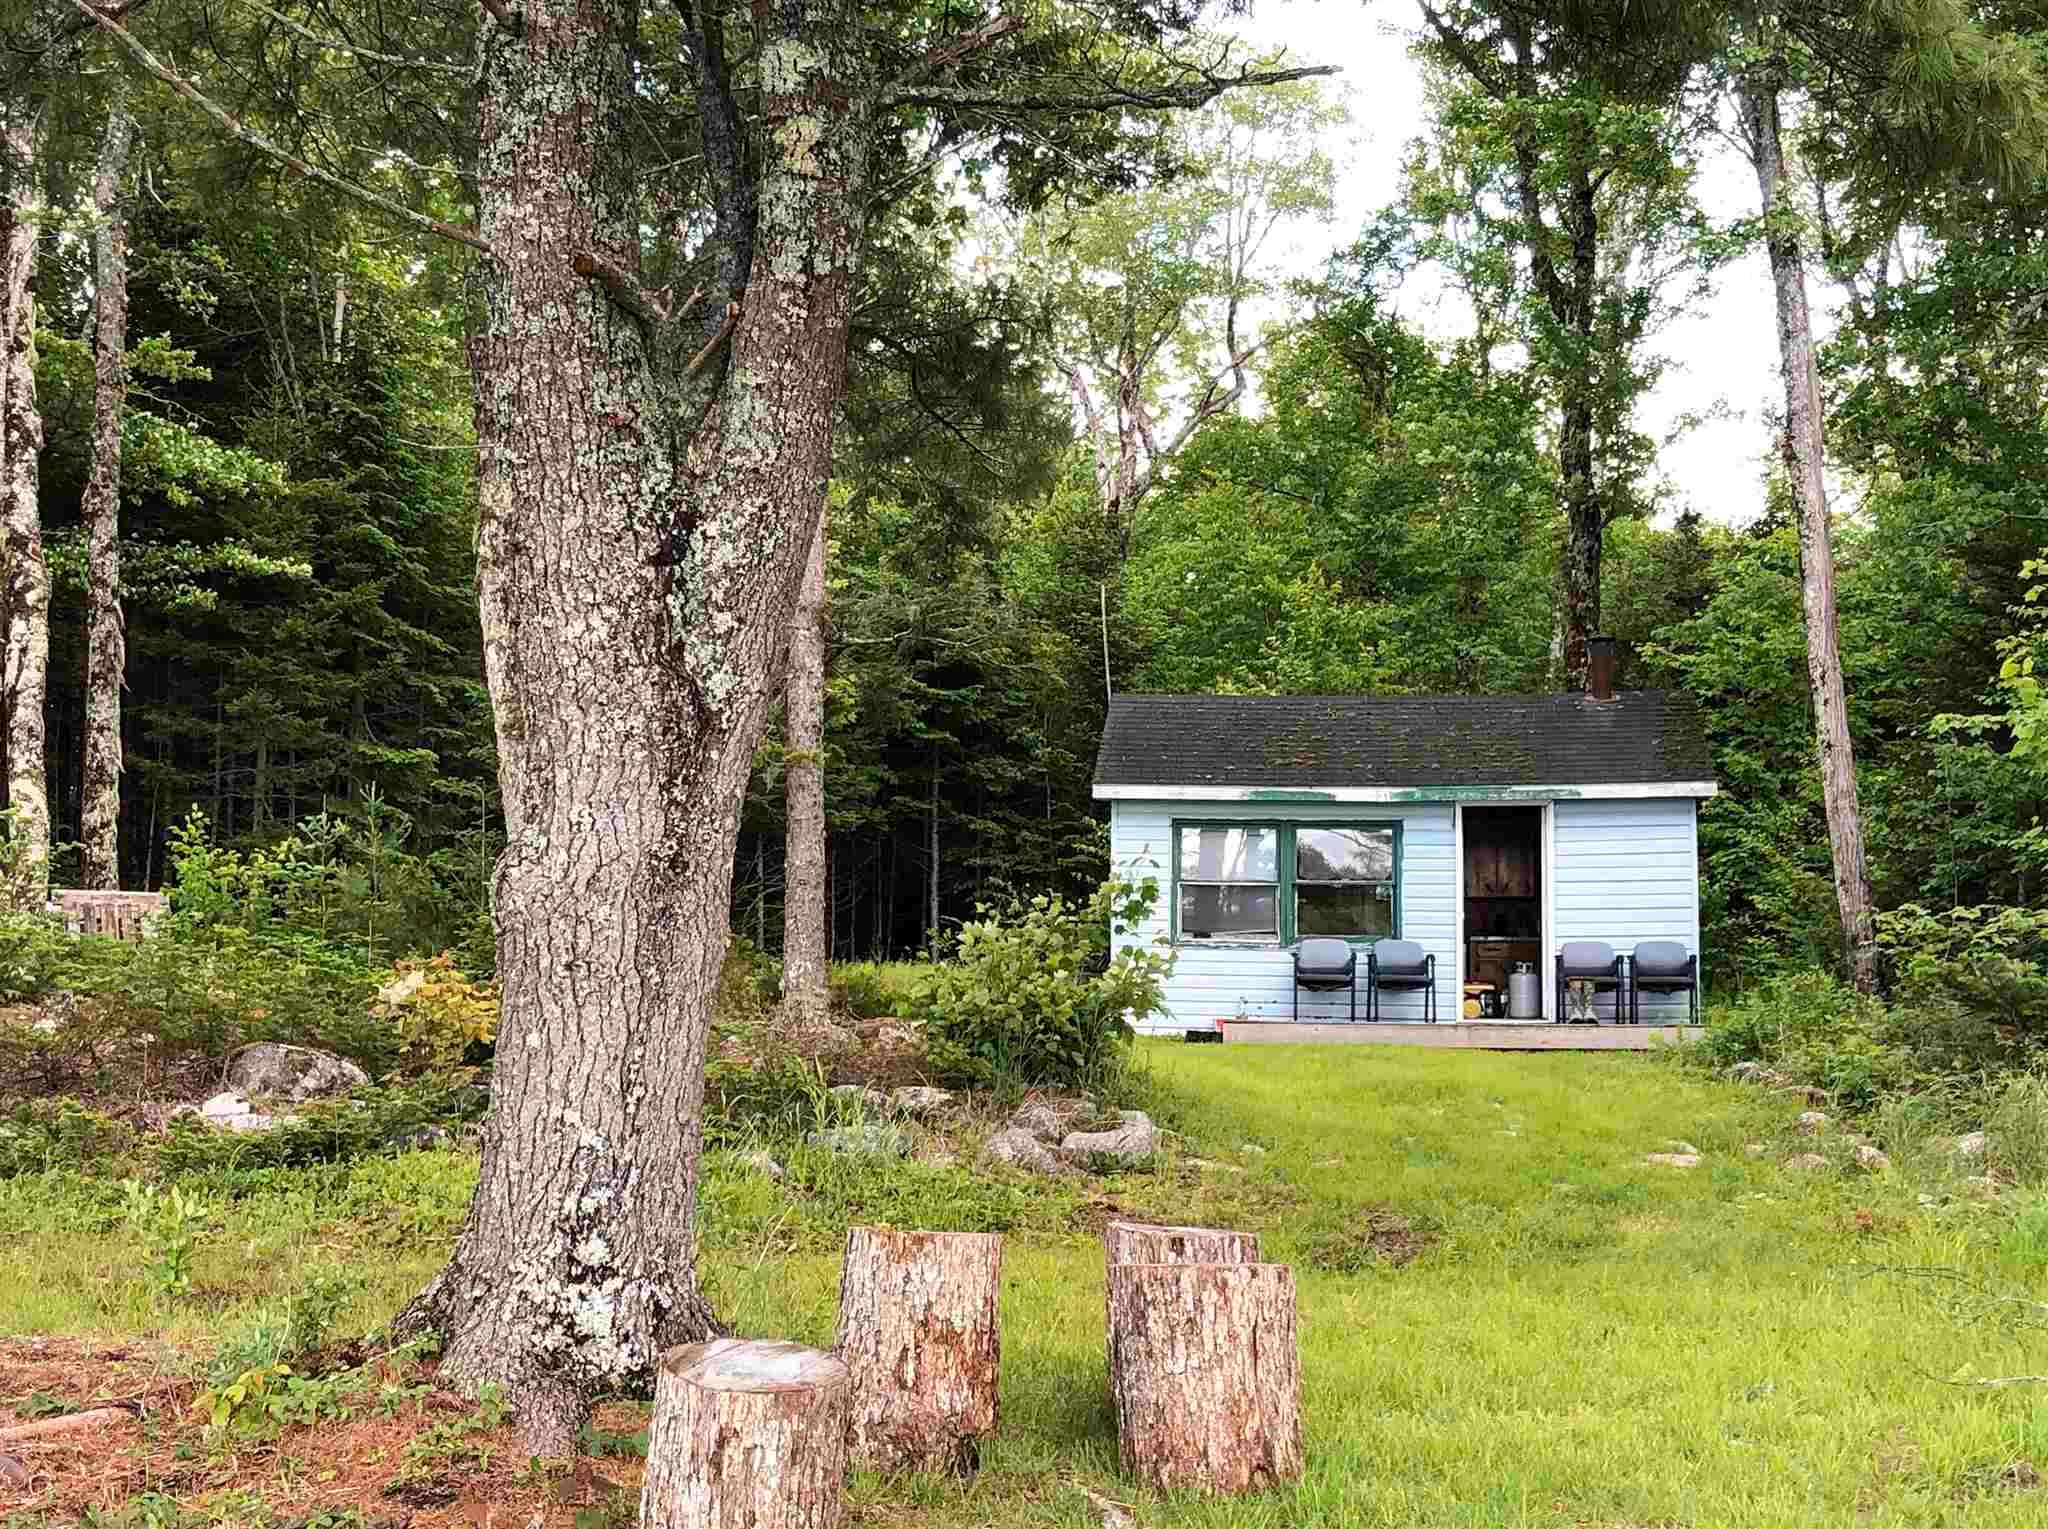 Main Photo: 225 Maple Lane in Mill Road: 405-Lunenburg County Residential for sale (South Shore)  : MLS®# 202115490